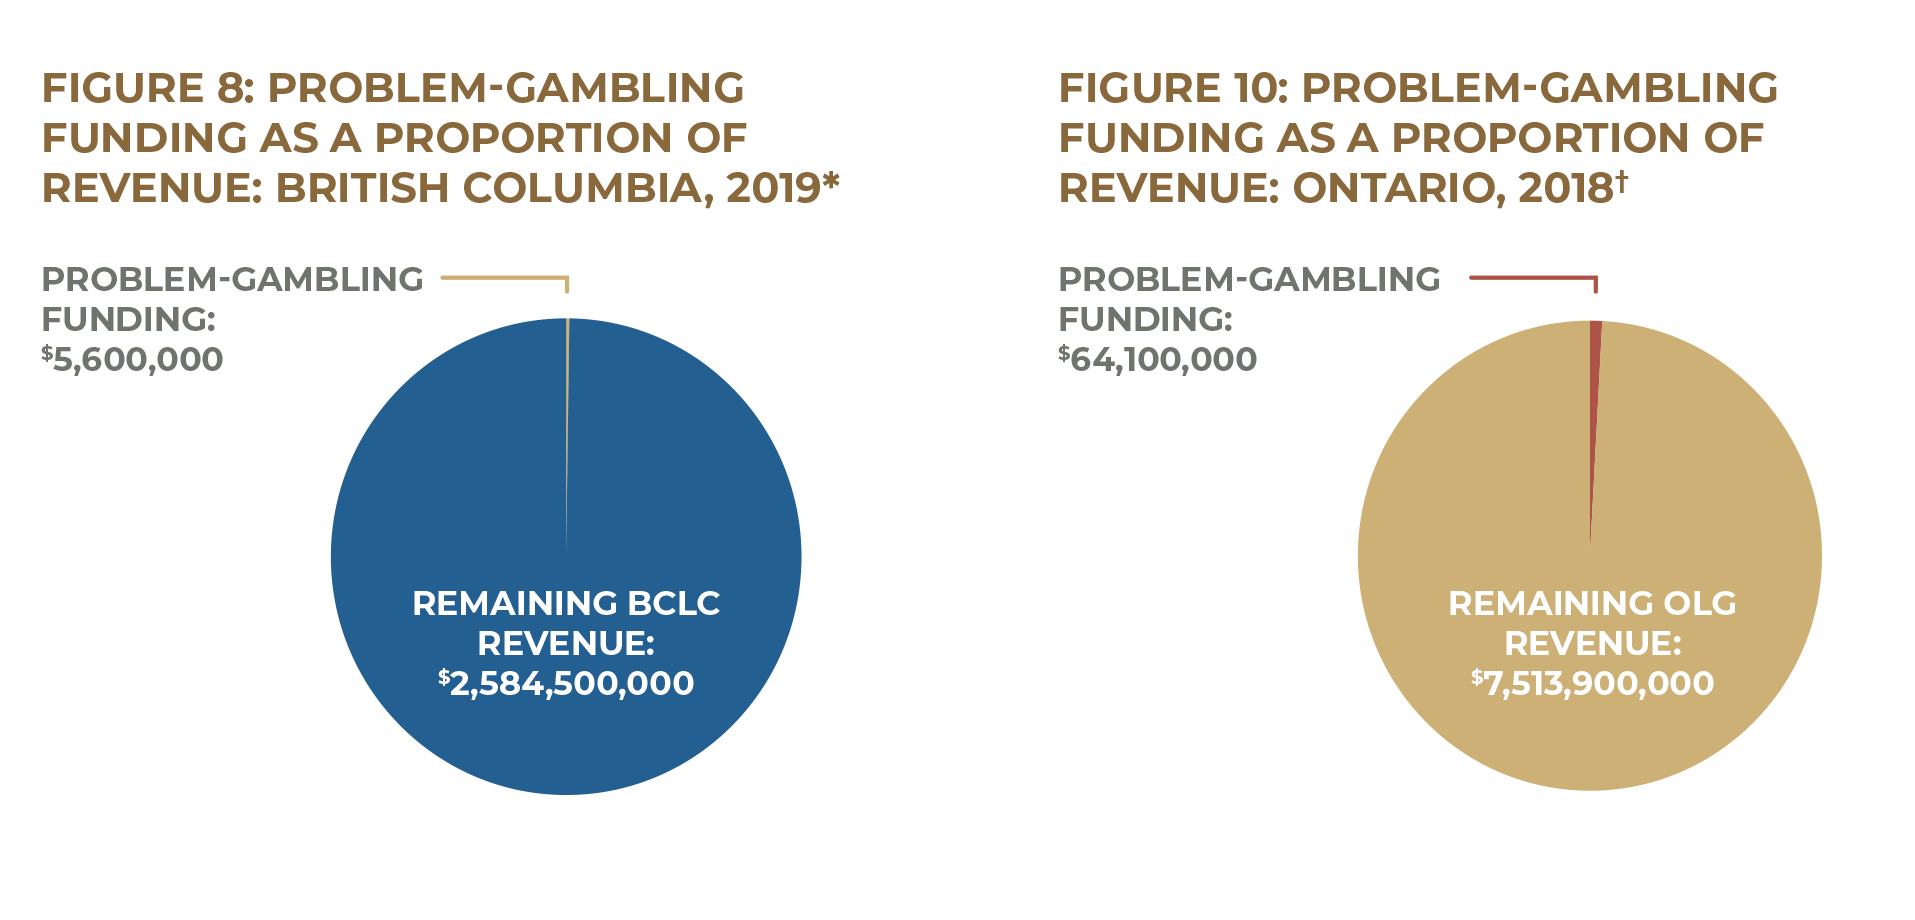 Figure 8: Problem-Gambling Funding as a Proportion of Revenue: British Columbia, 2019 Figure 10: Problem-Gambling Funding as a Proportion of Revenue: Ontario, 2018